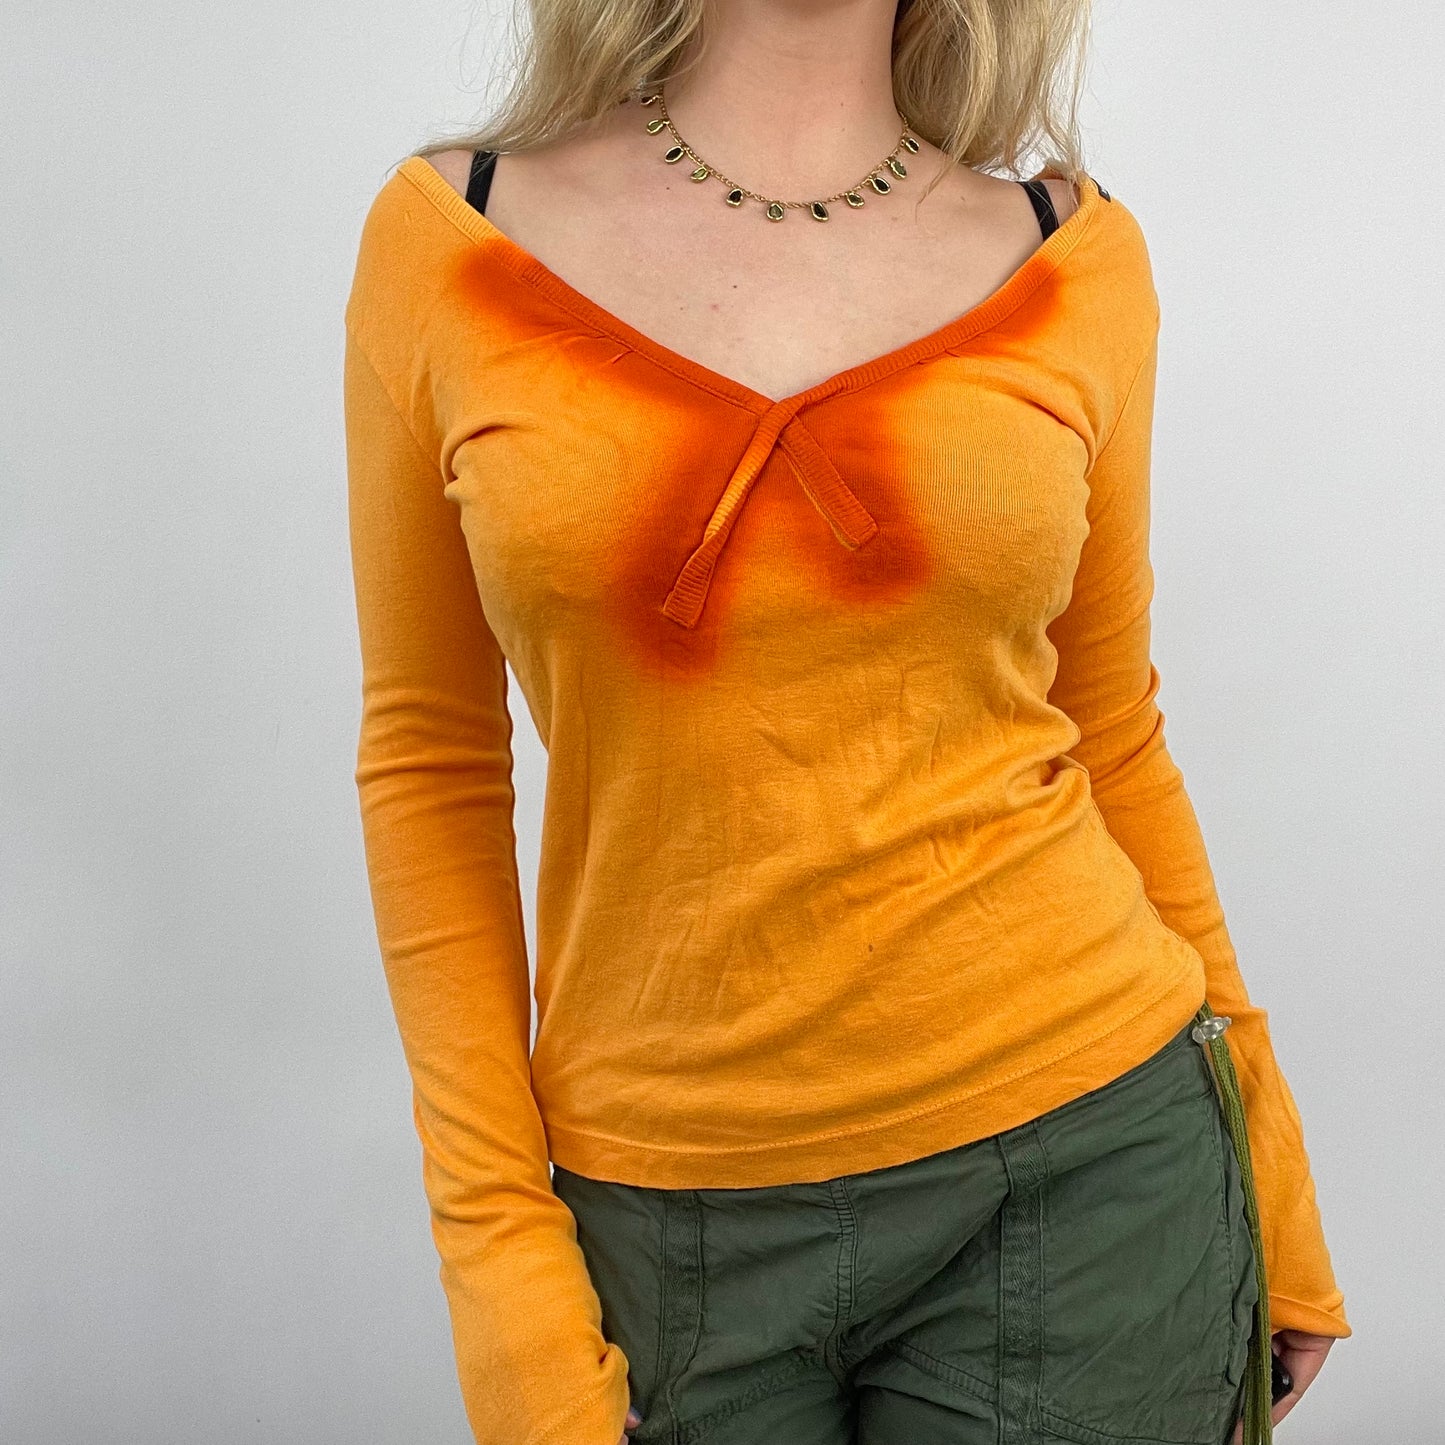 💻 HIPPY CHIC DROP | small playlife orange long sleeve top with contrast orange neckline